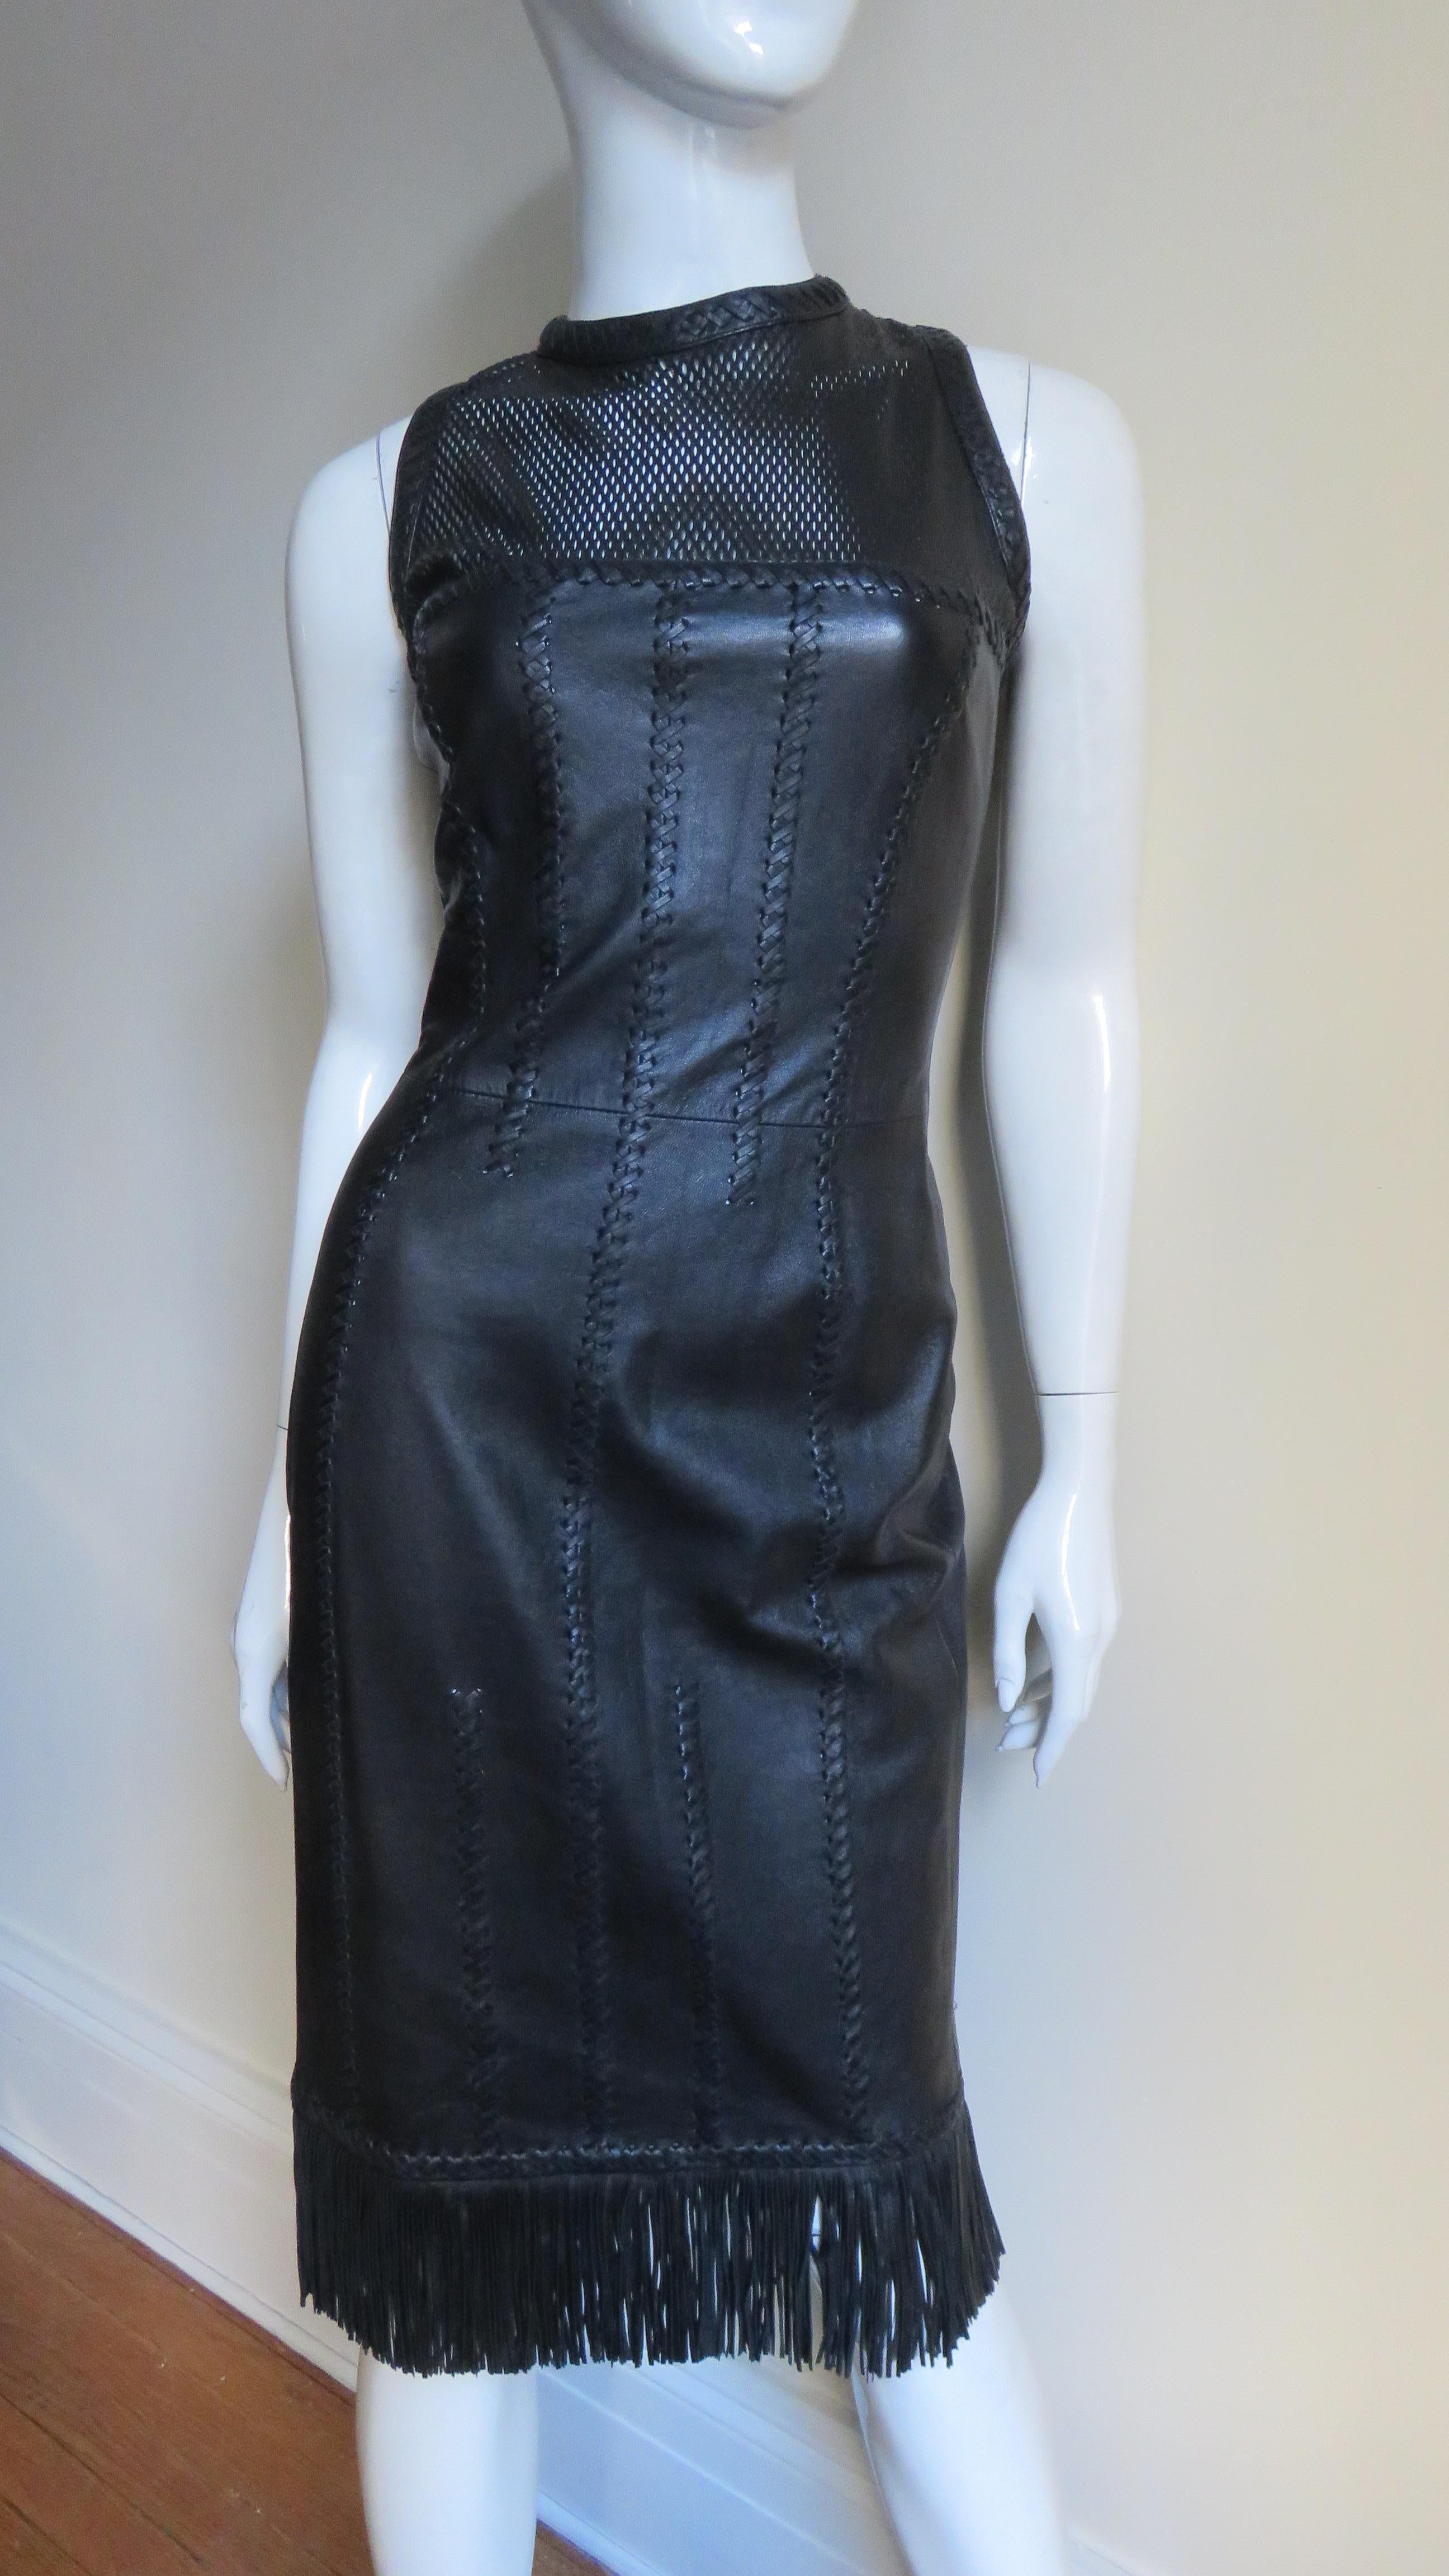  Gianni Versace Leather Lace up Dress S/S 2002 For Sale 3